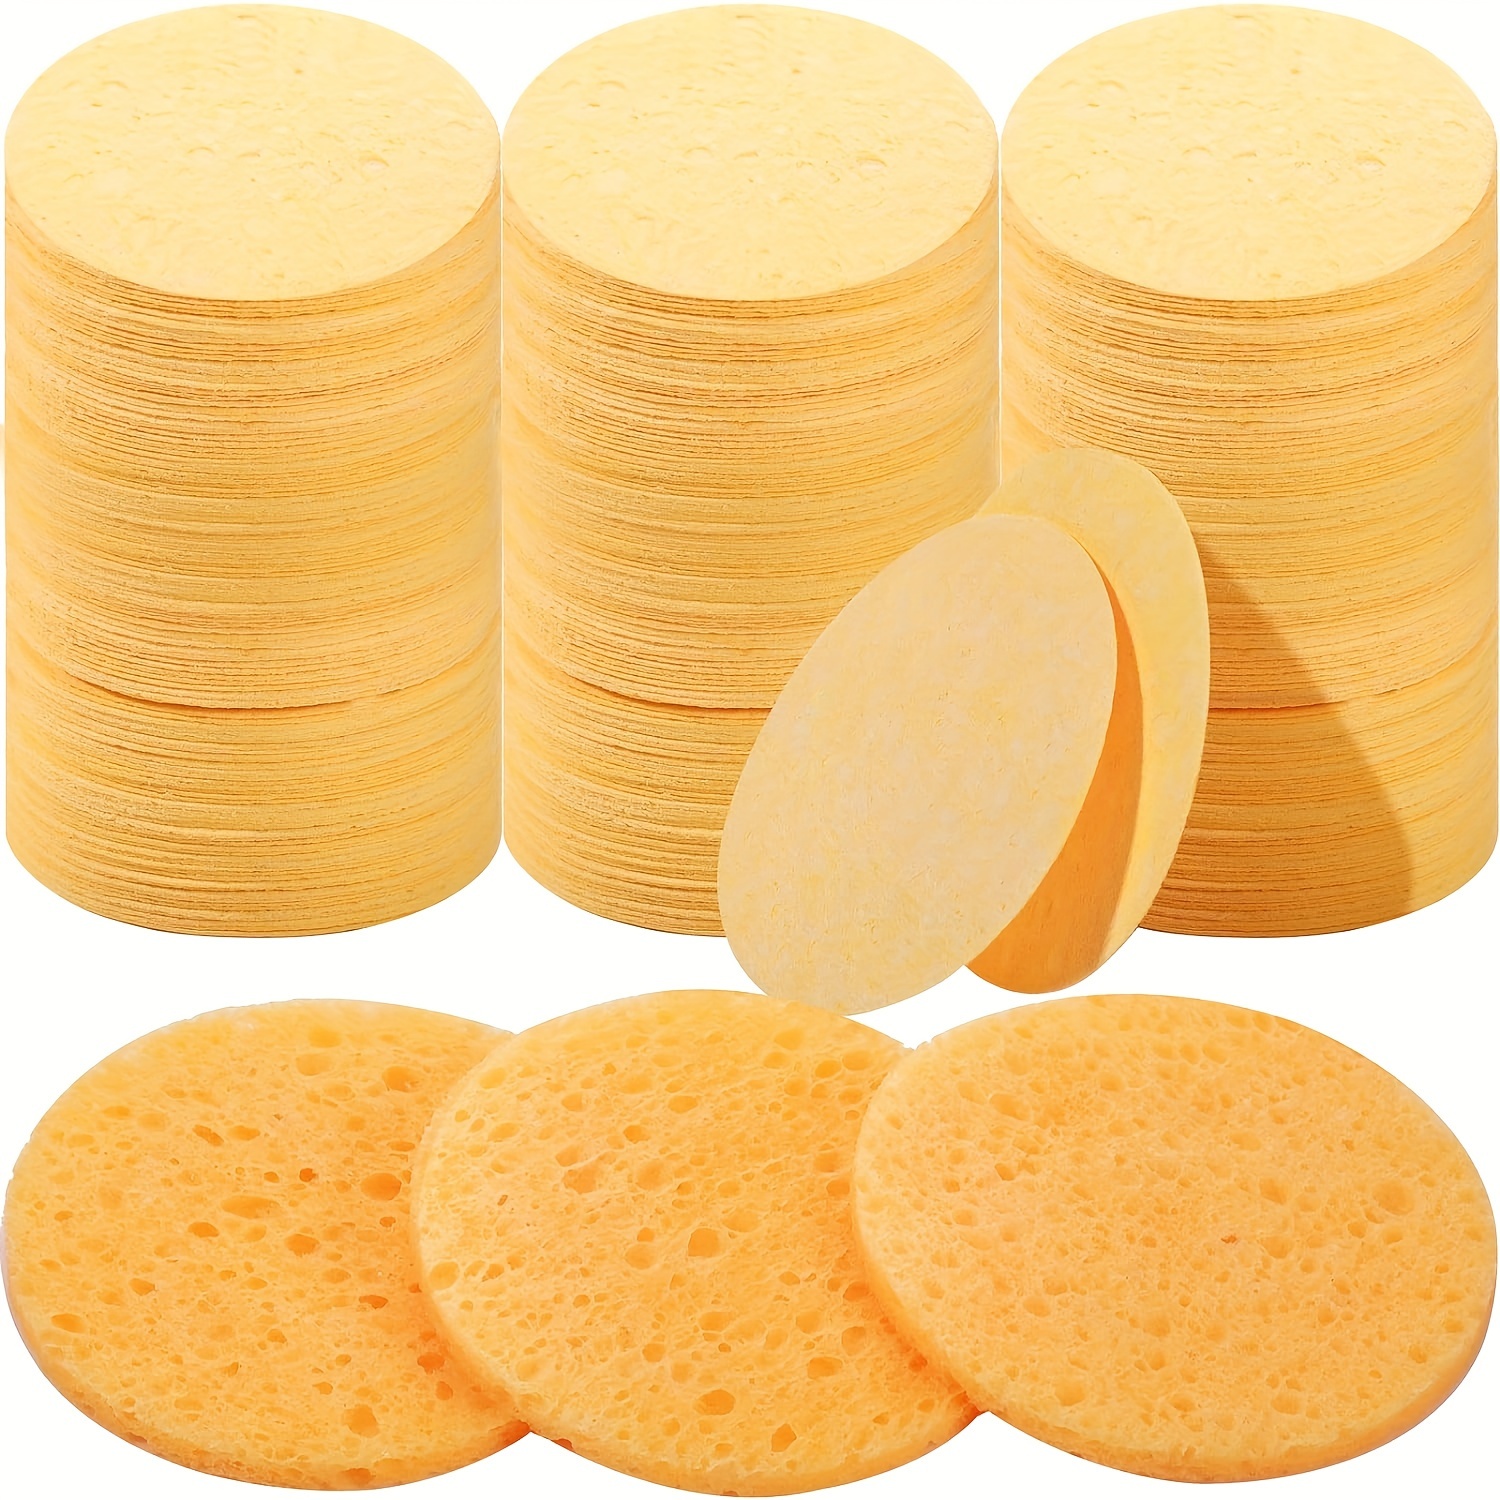 

20pcs Yellow Natural Cellulose Facial Sponges, Compressed Round Face Cleansing Pads For Makeup Removal, Gentle Exfoliation, Mask Application, Spa Cosmetic Sponges, Home & Travel Use